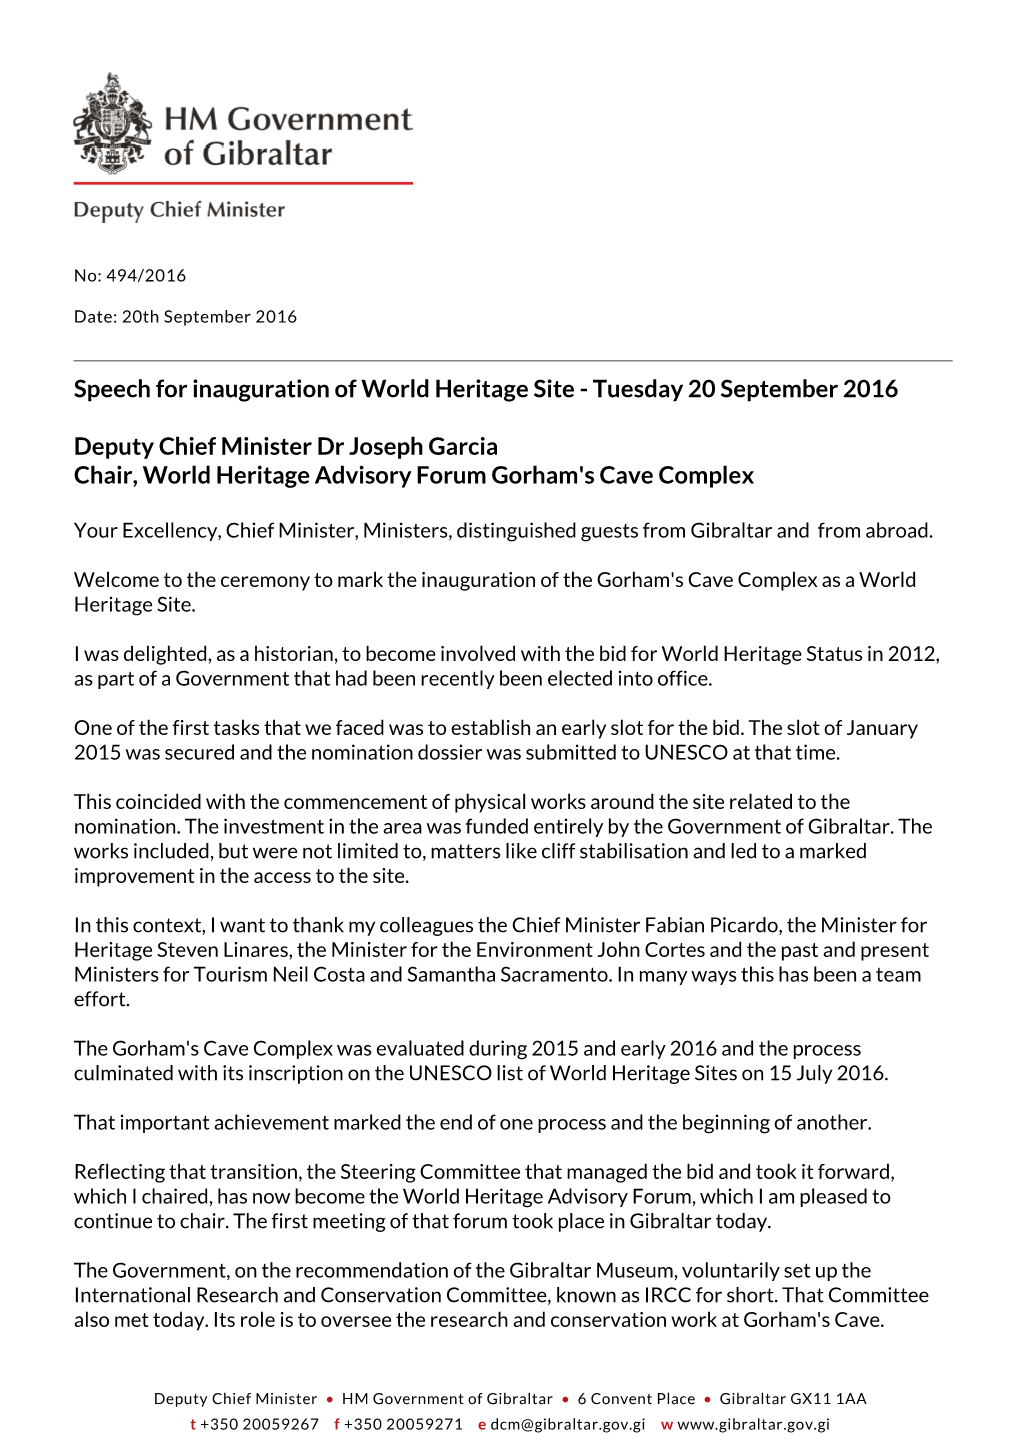 Speech for Inauguration of World Heritage Site - Tuesday 20 September 2016